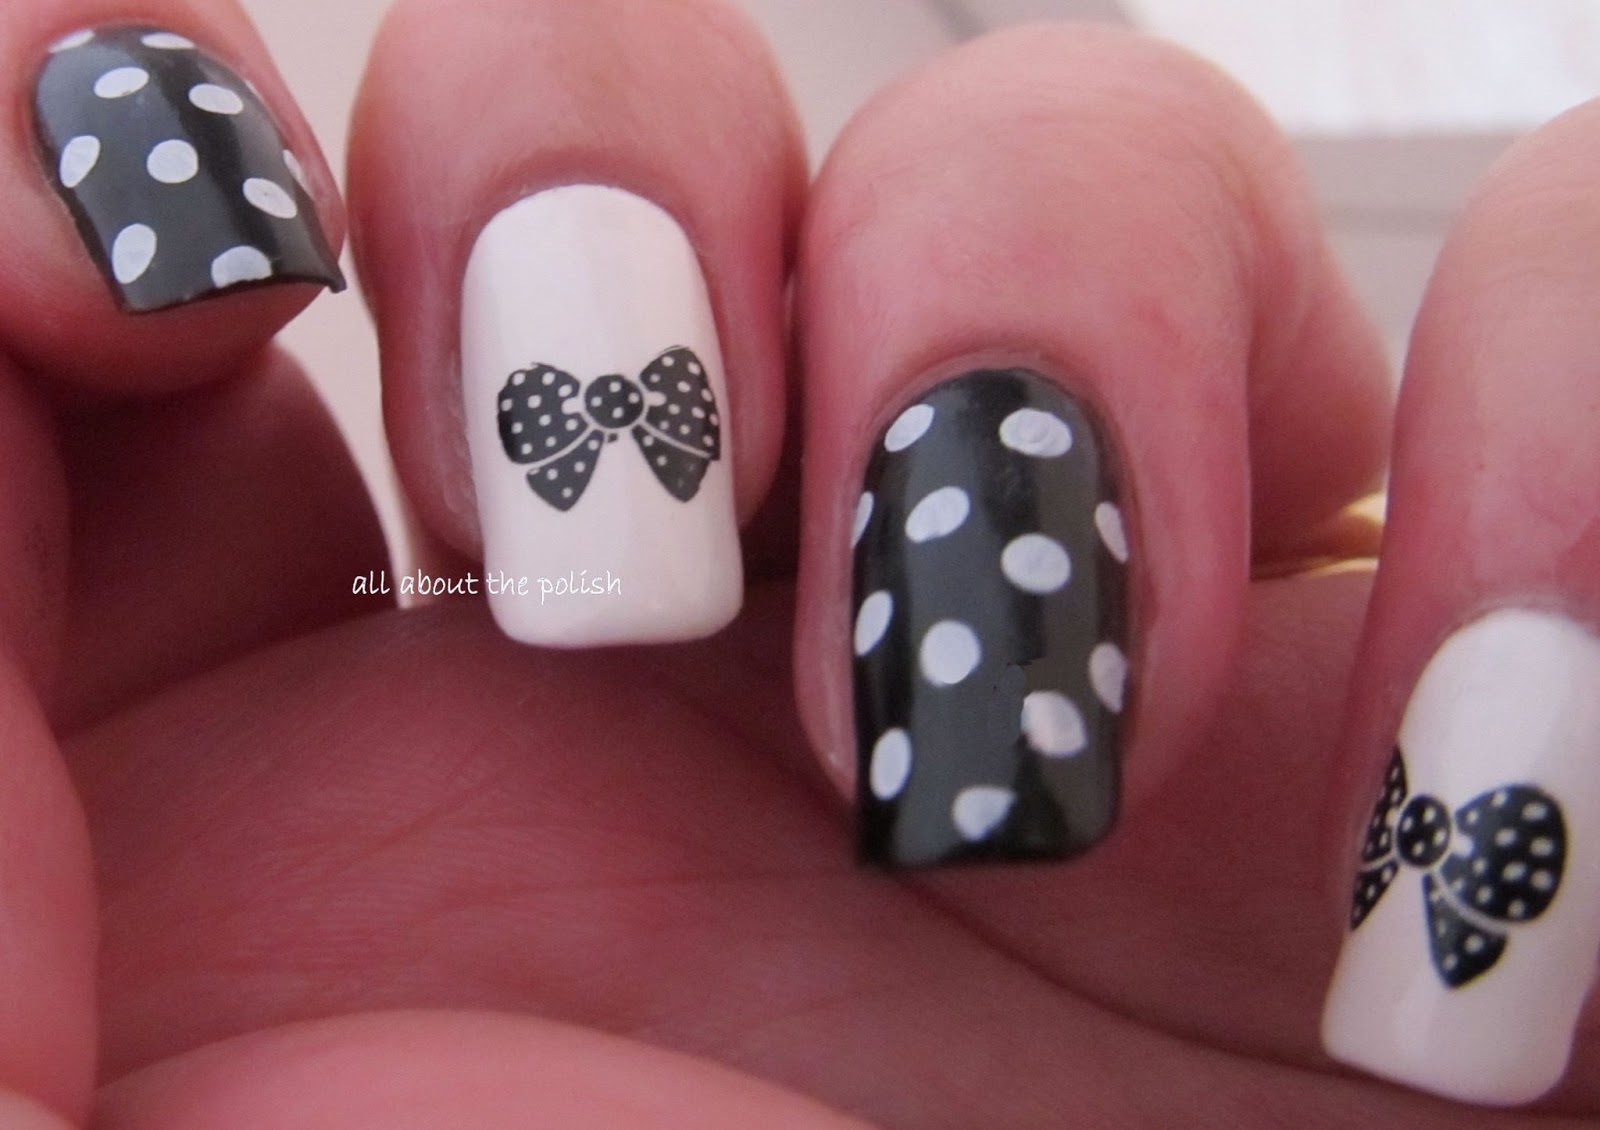 It's all about the polish: Black & White - Laid back challenge